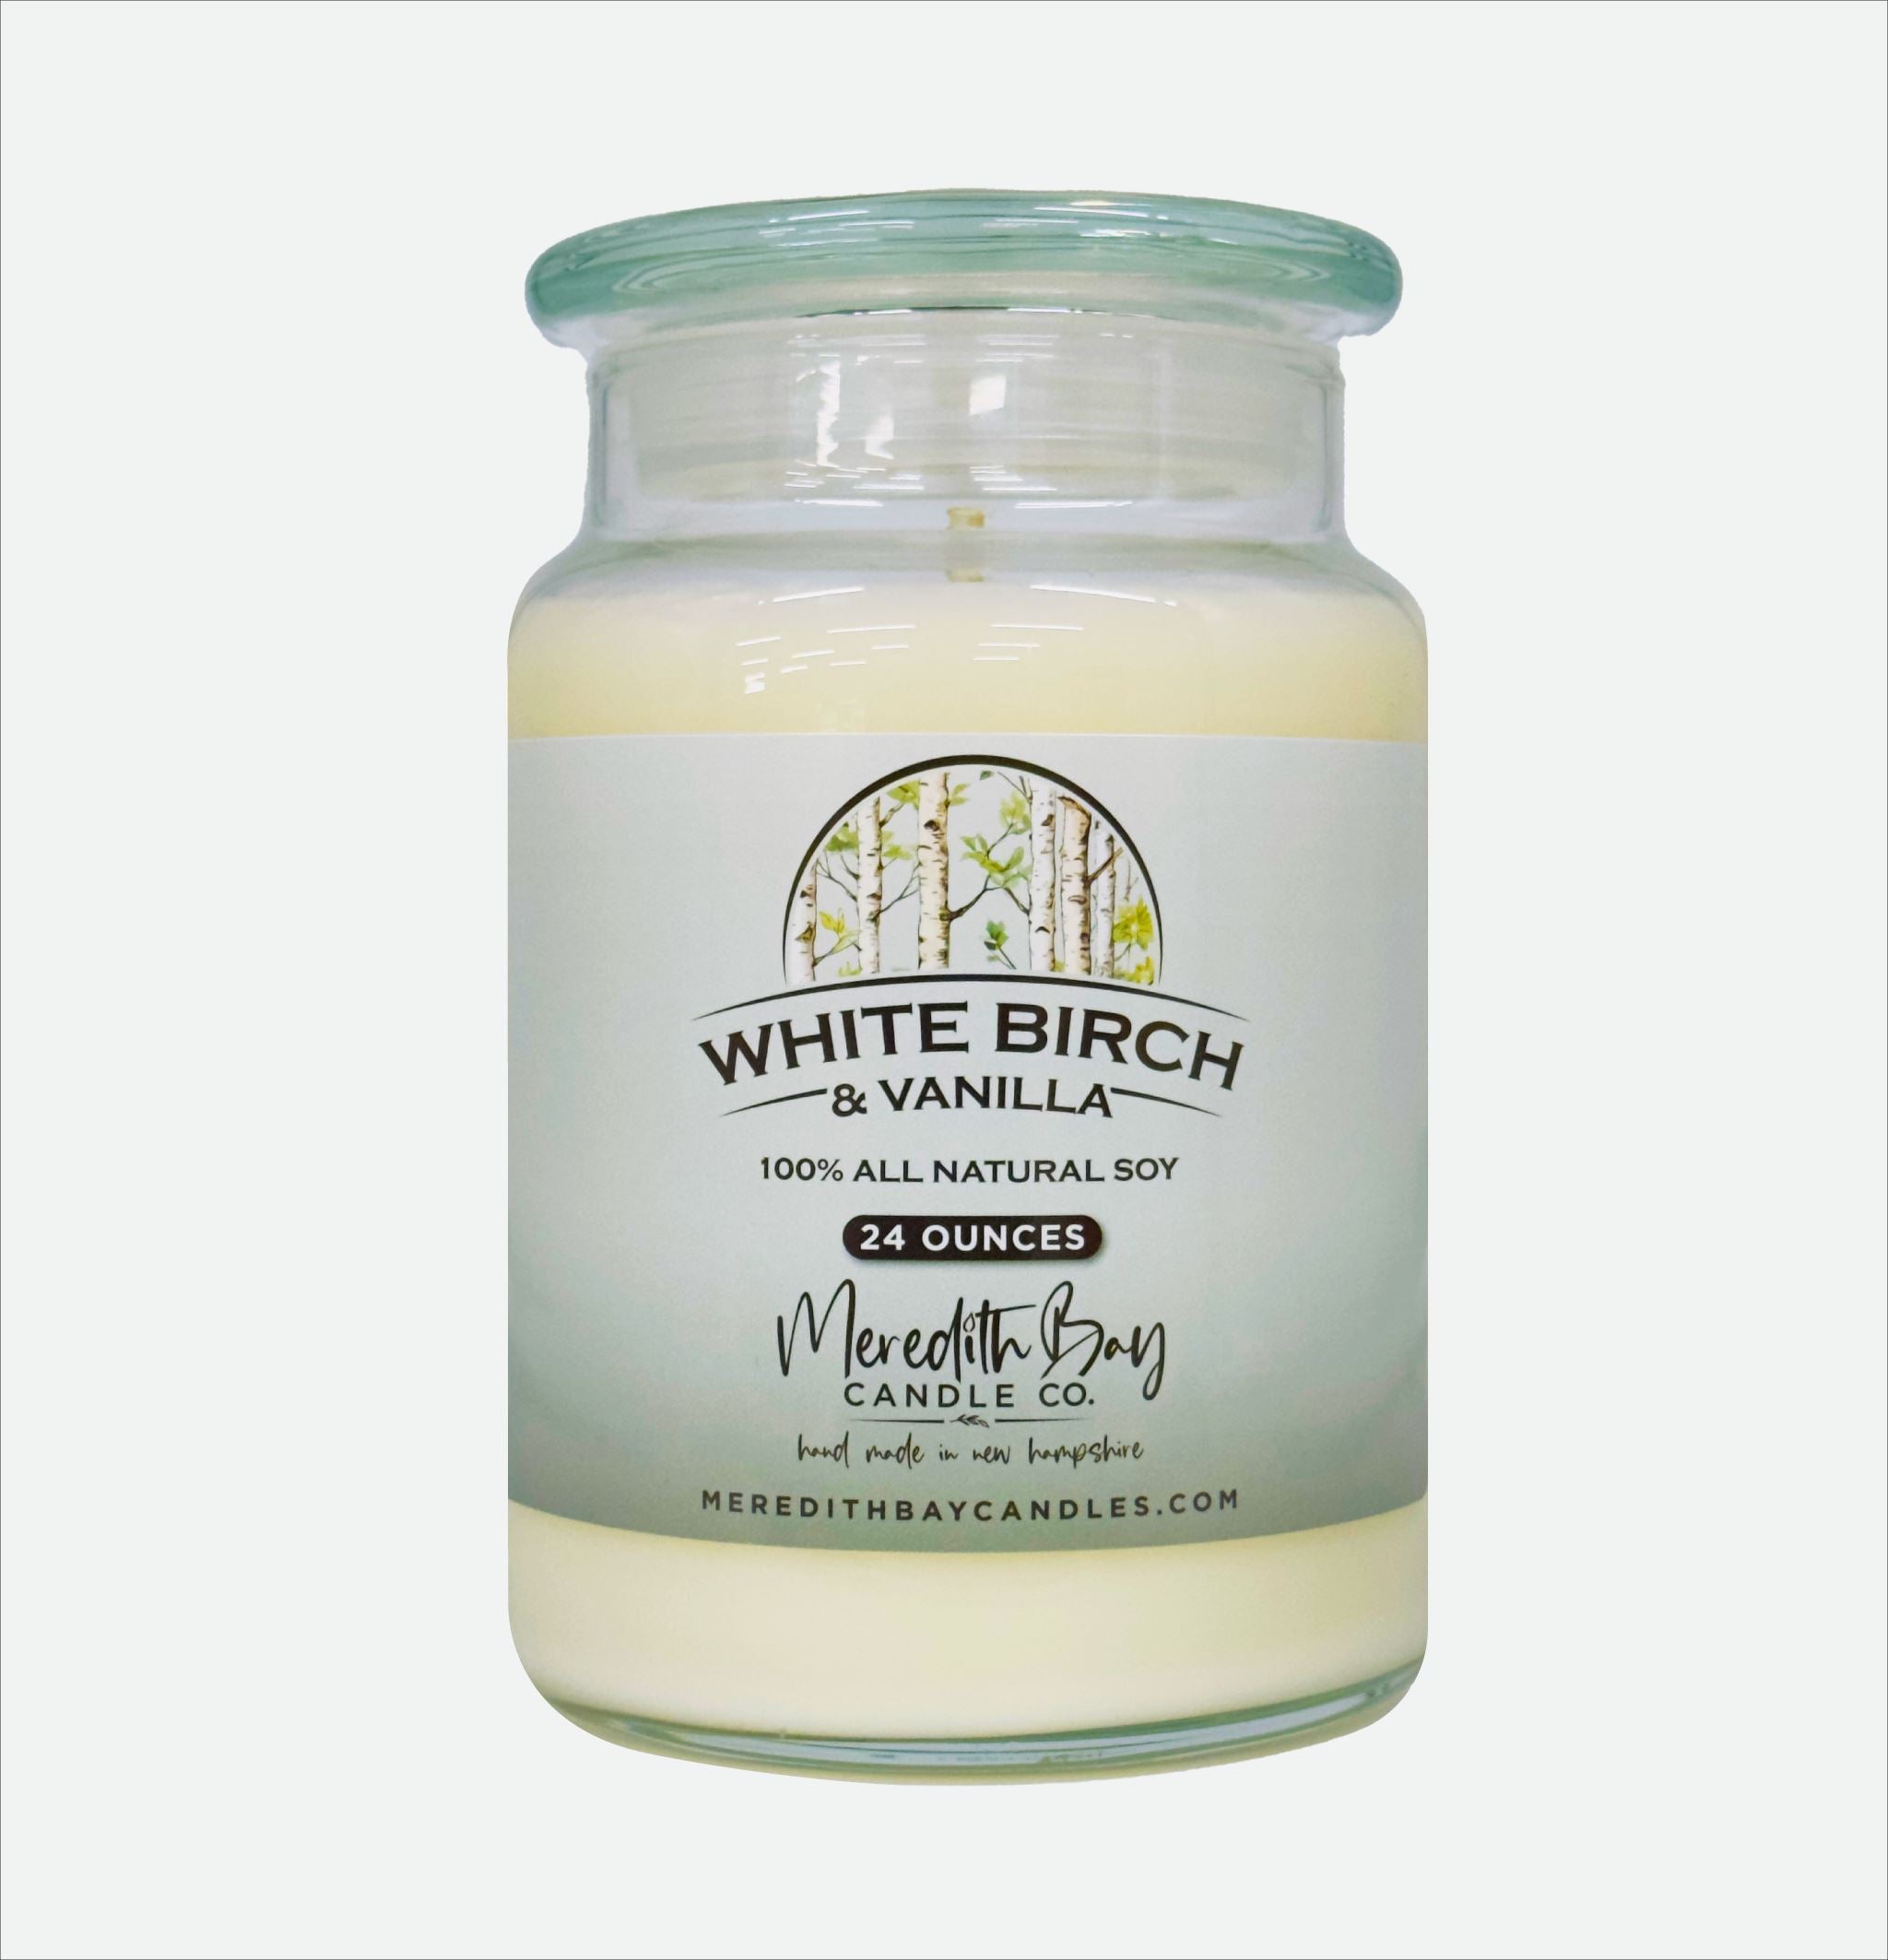 White Birch & Vanilla Soy Candle Meredith Bay Candle Co 24 Oz 